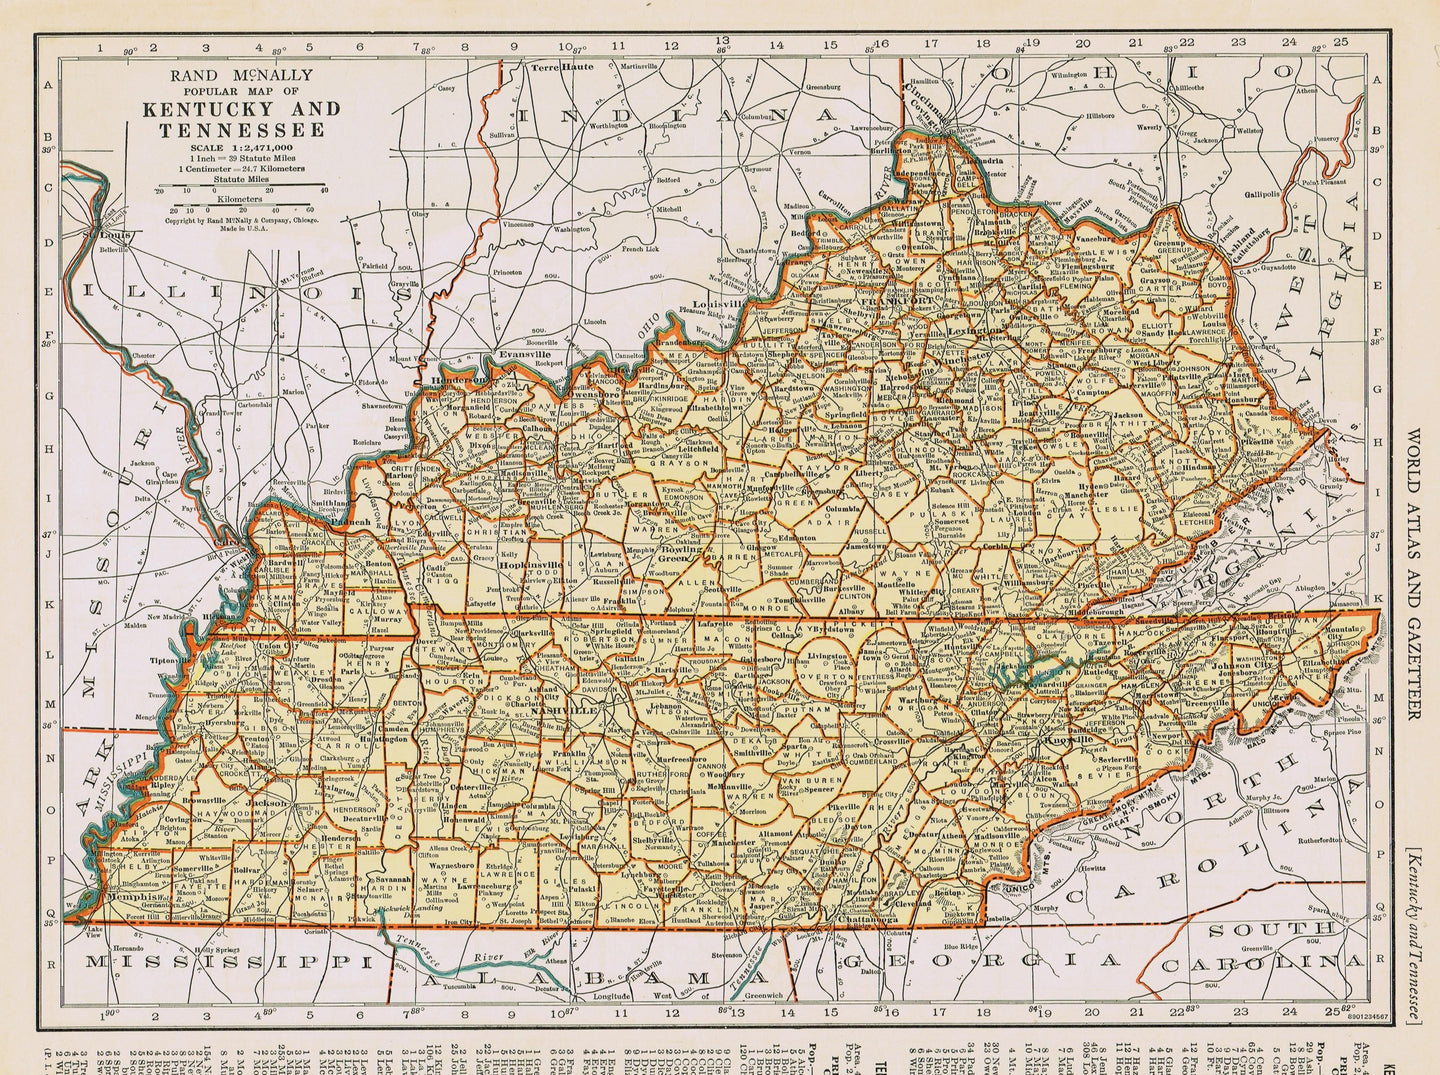 Genuine-Antique-Map-Popular-Map-of-Kentucky-and-Tennessee-1940-Rand-McNally-Maps-Of-Antiquity